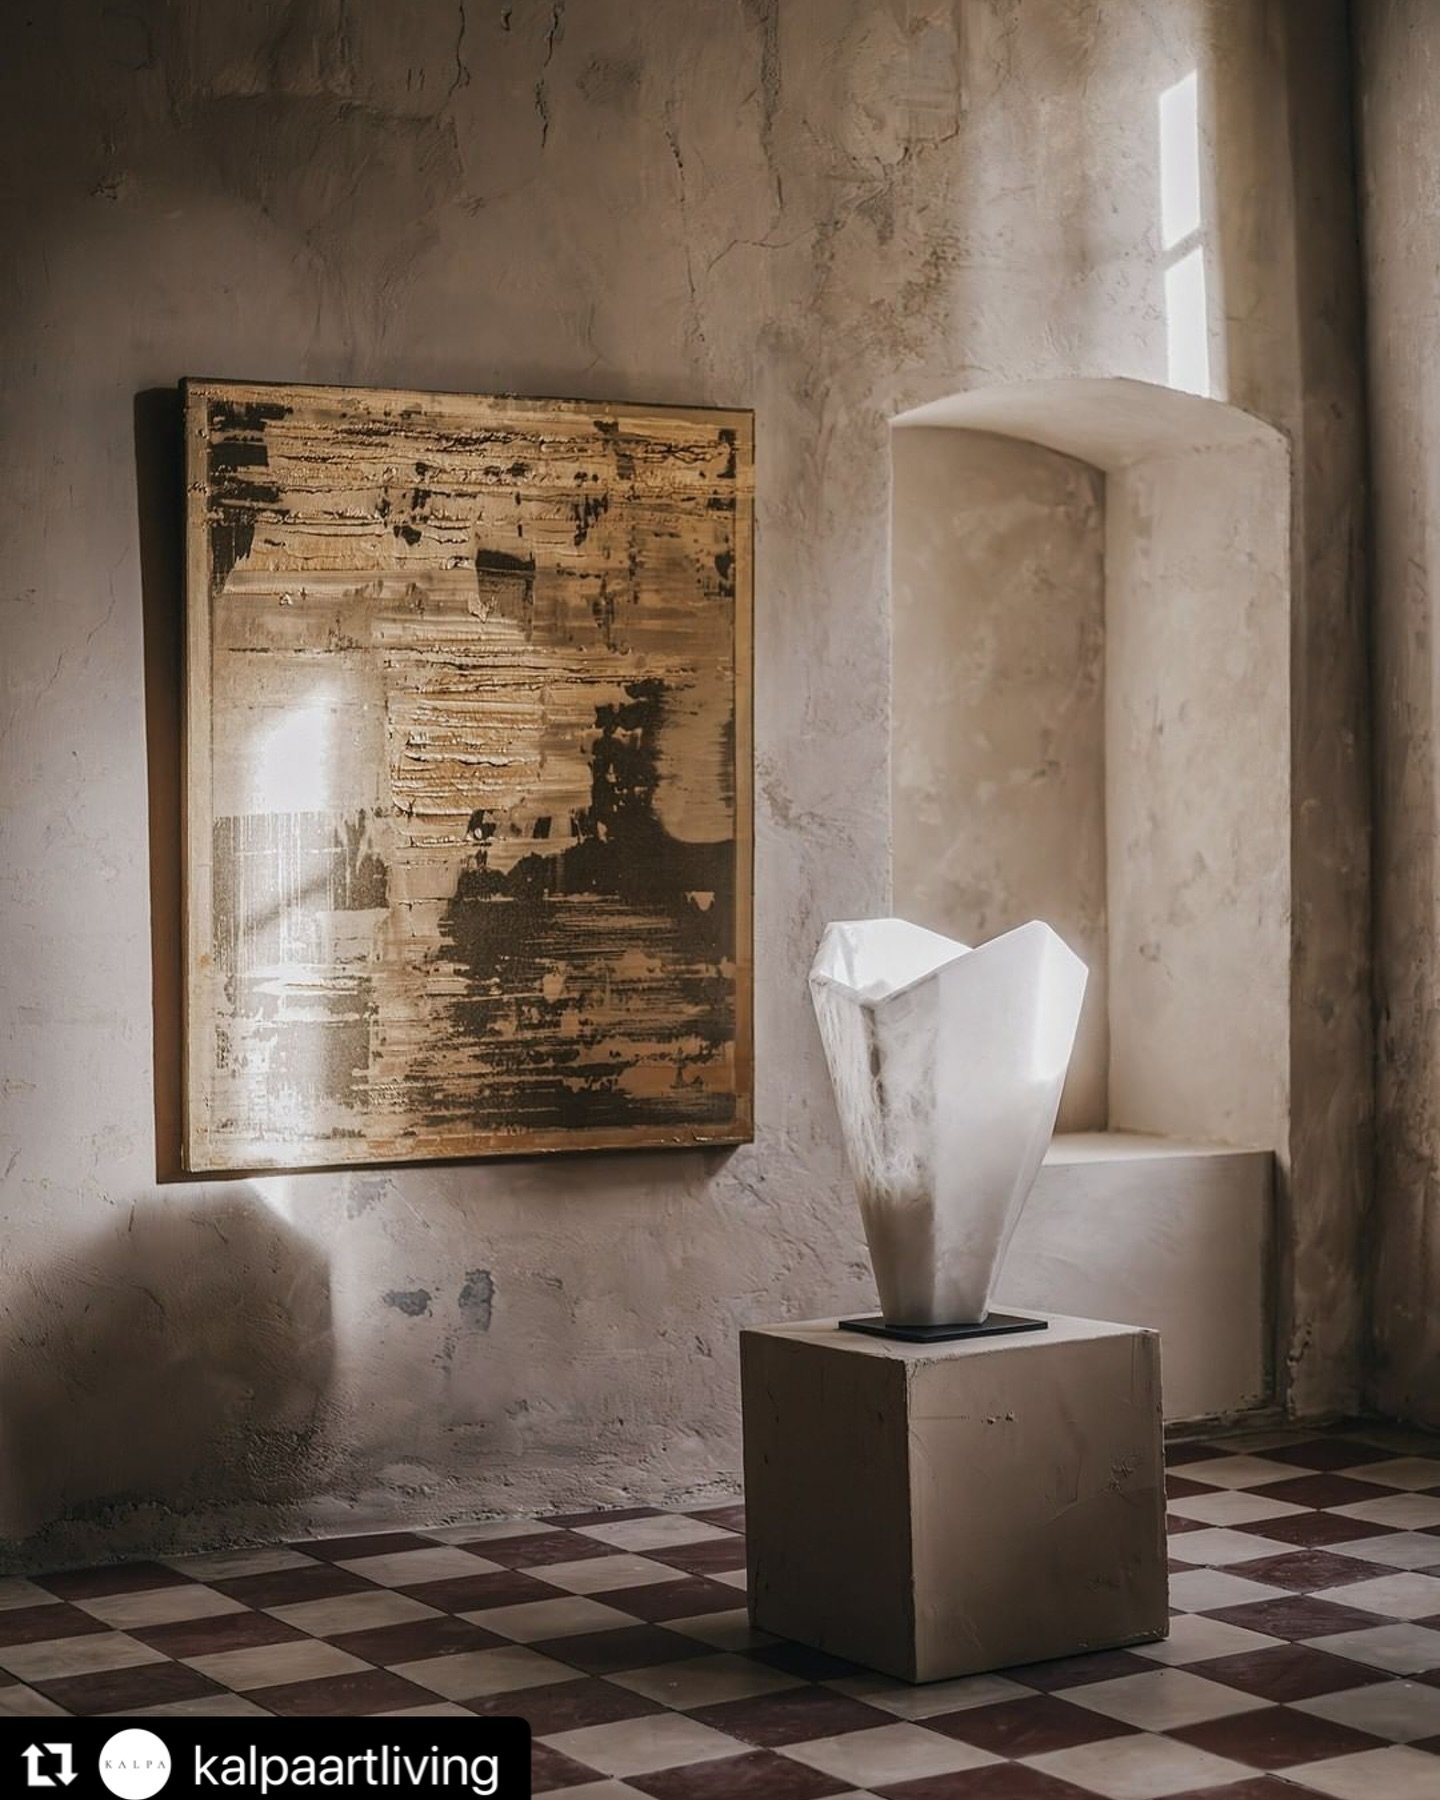 #Repost from @kalpaartliving 
・・・
Meditation of light in this charming dialogue of art in Palazzo Bonomini, the home of KALPA in Volterra, Tuscany. 

Bronze painting by Pierre Bonnefille is an abstract study of the reflection of light on water, while